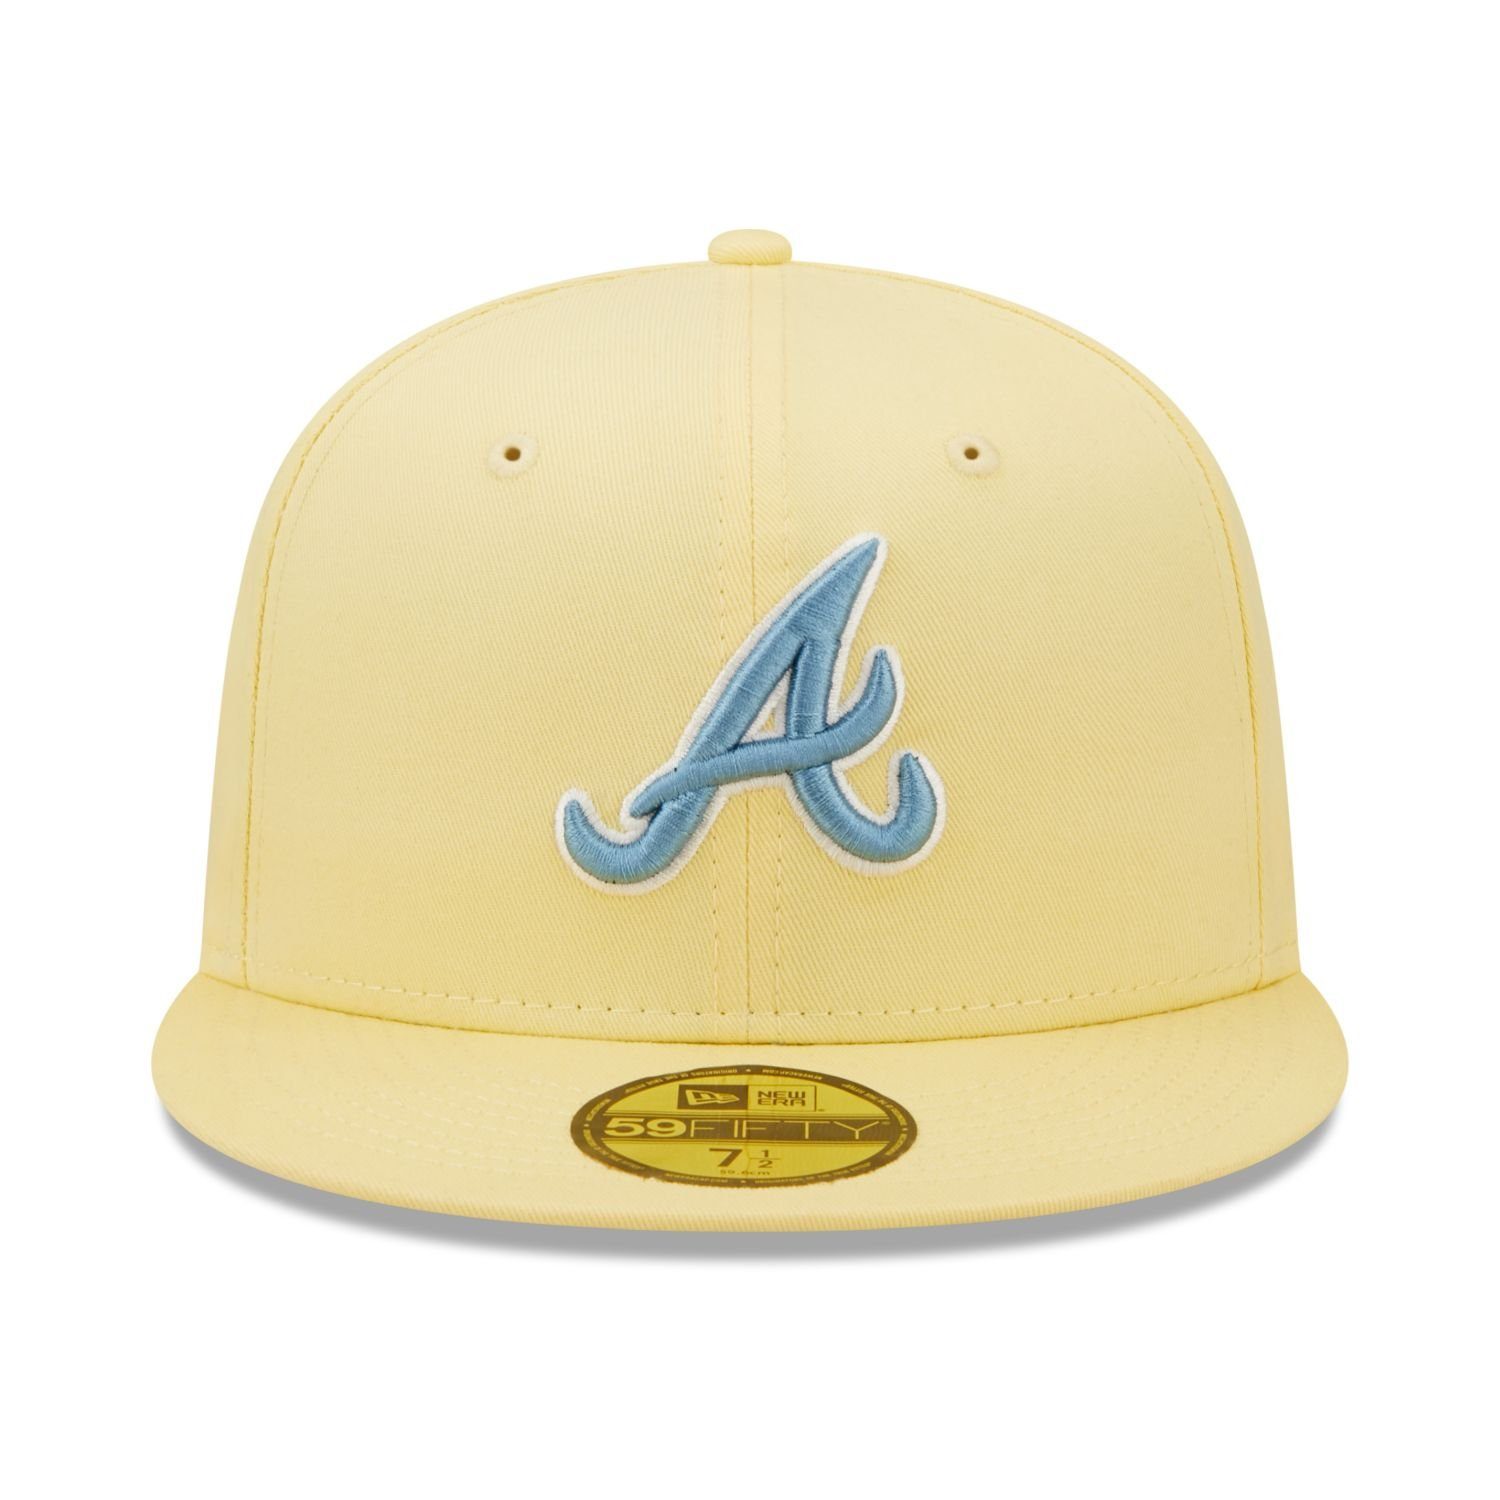 New Atlanta Cap Braves 59Fifty COOPERSTOWN Fitted Era